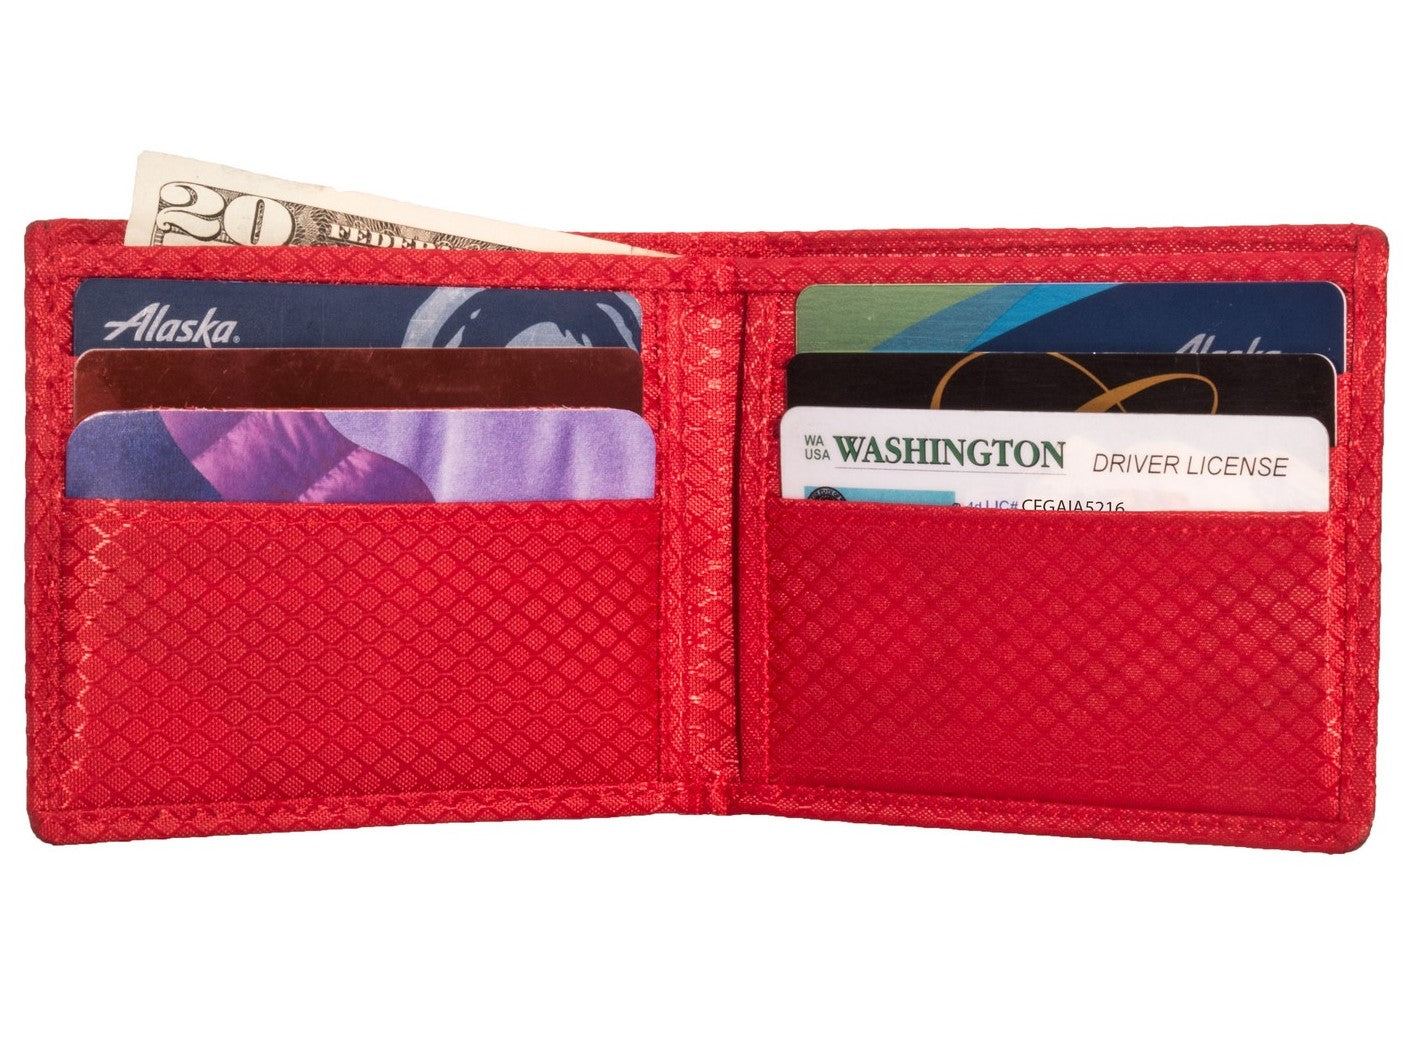 Classic MAX carbon fiber bifold wallet with red interior